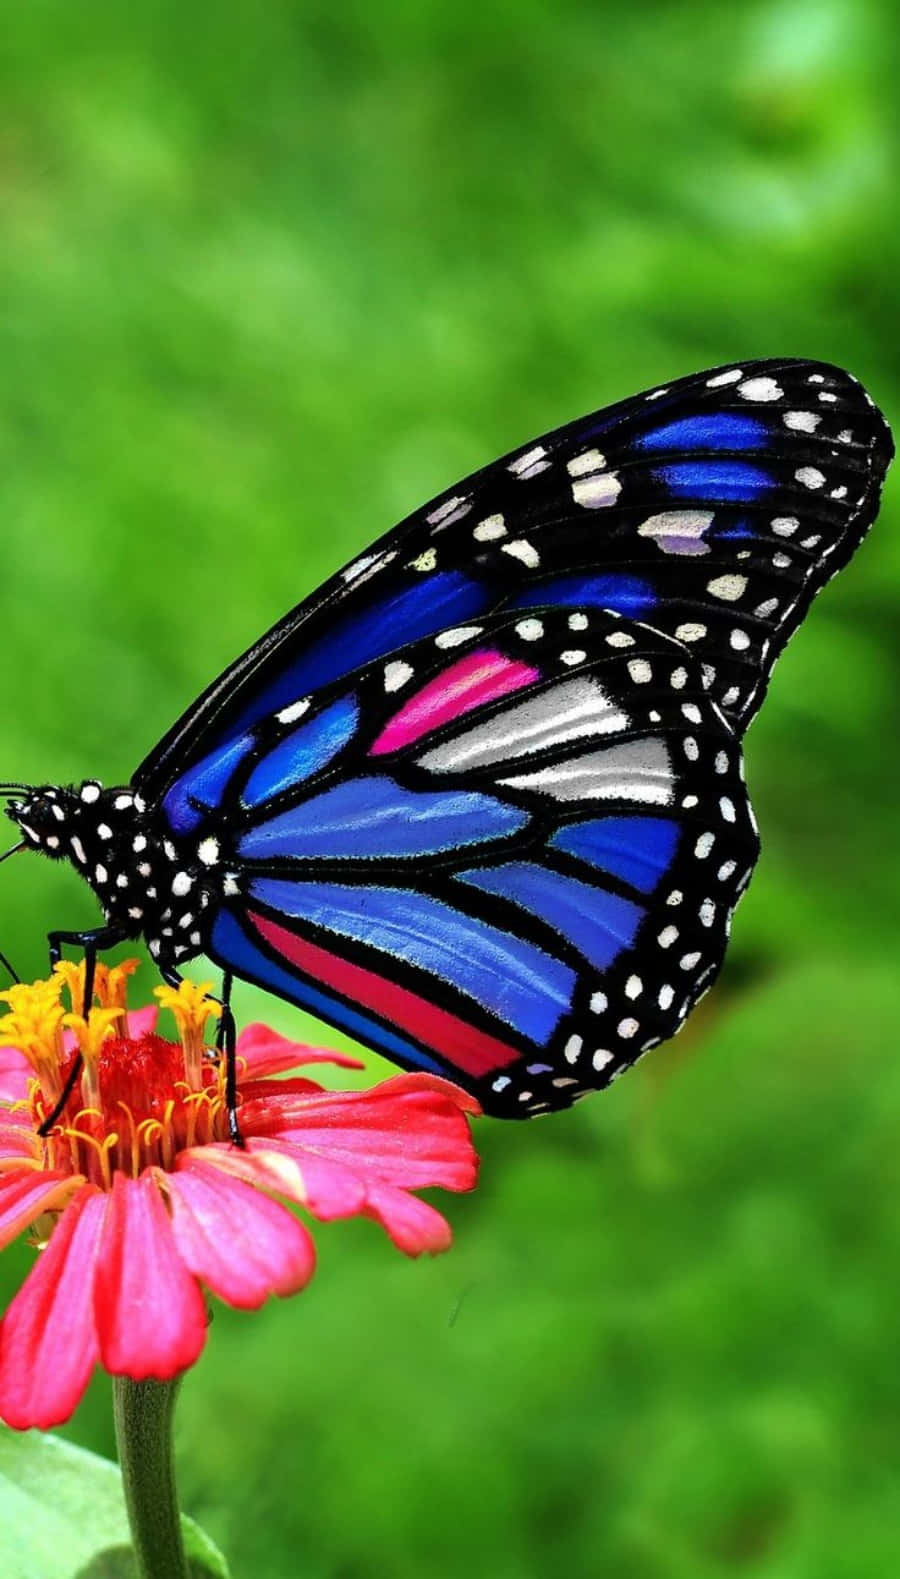 "A colorful butterfly flitting around a vibrant garden"